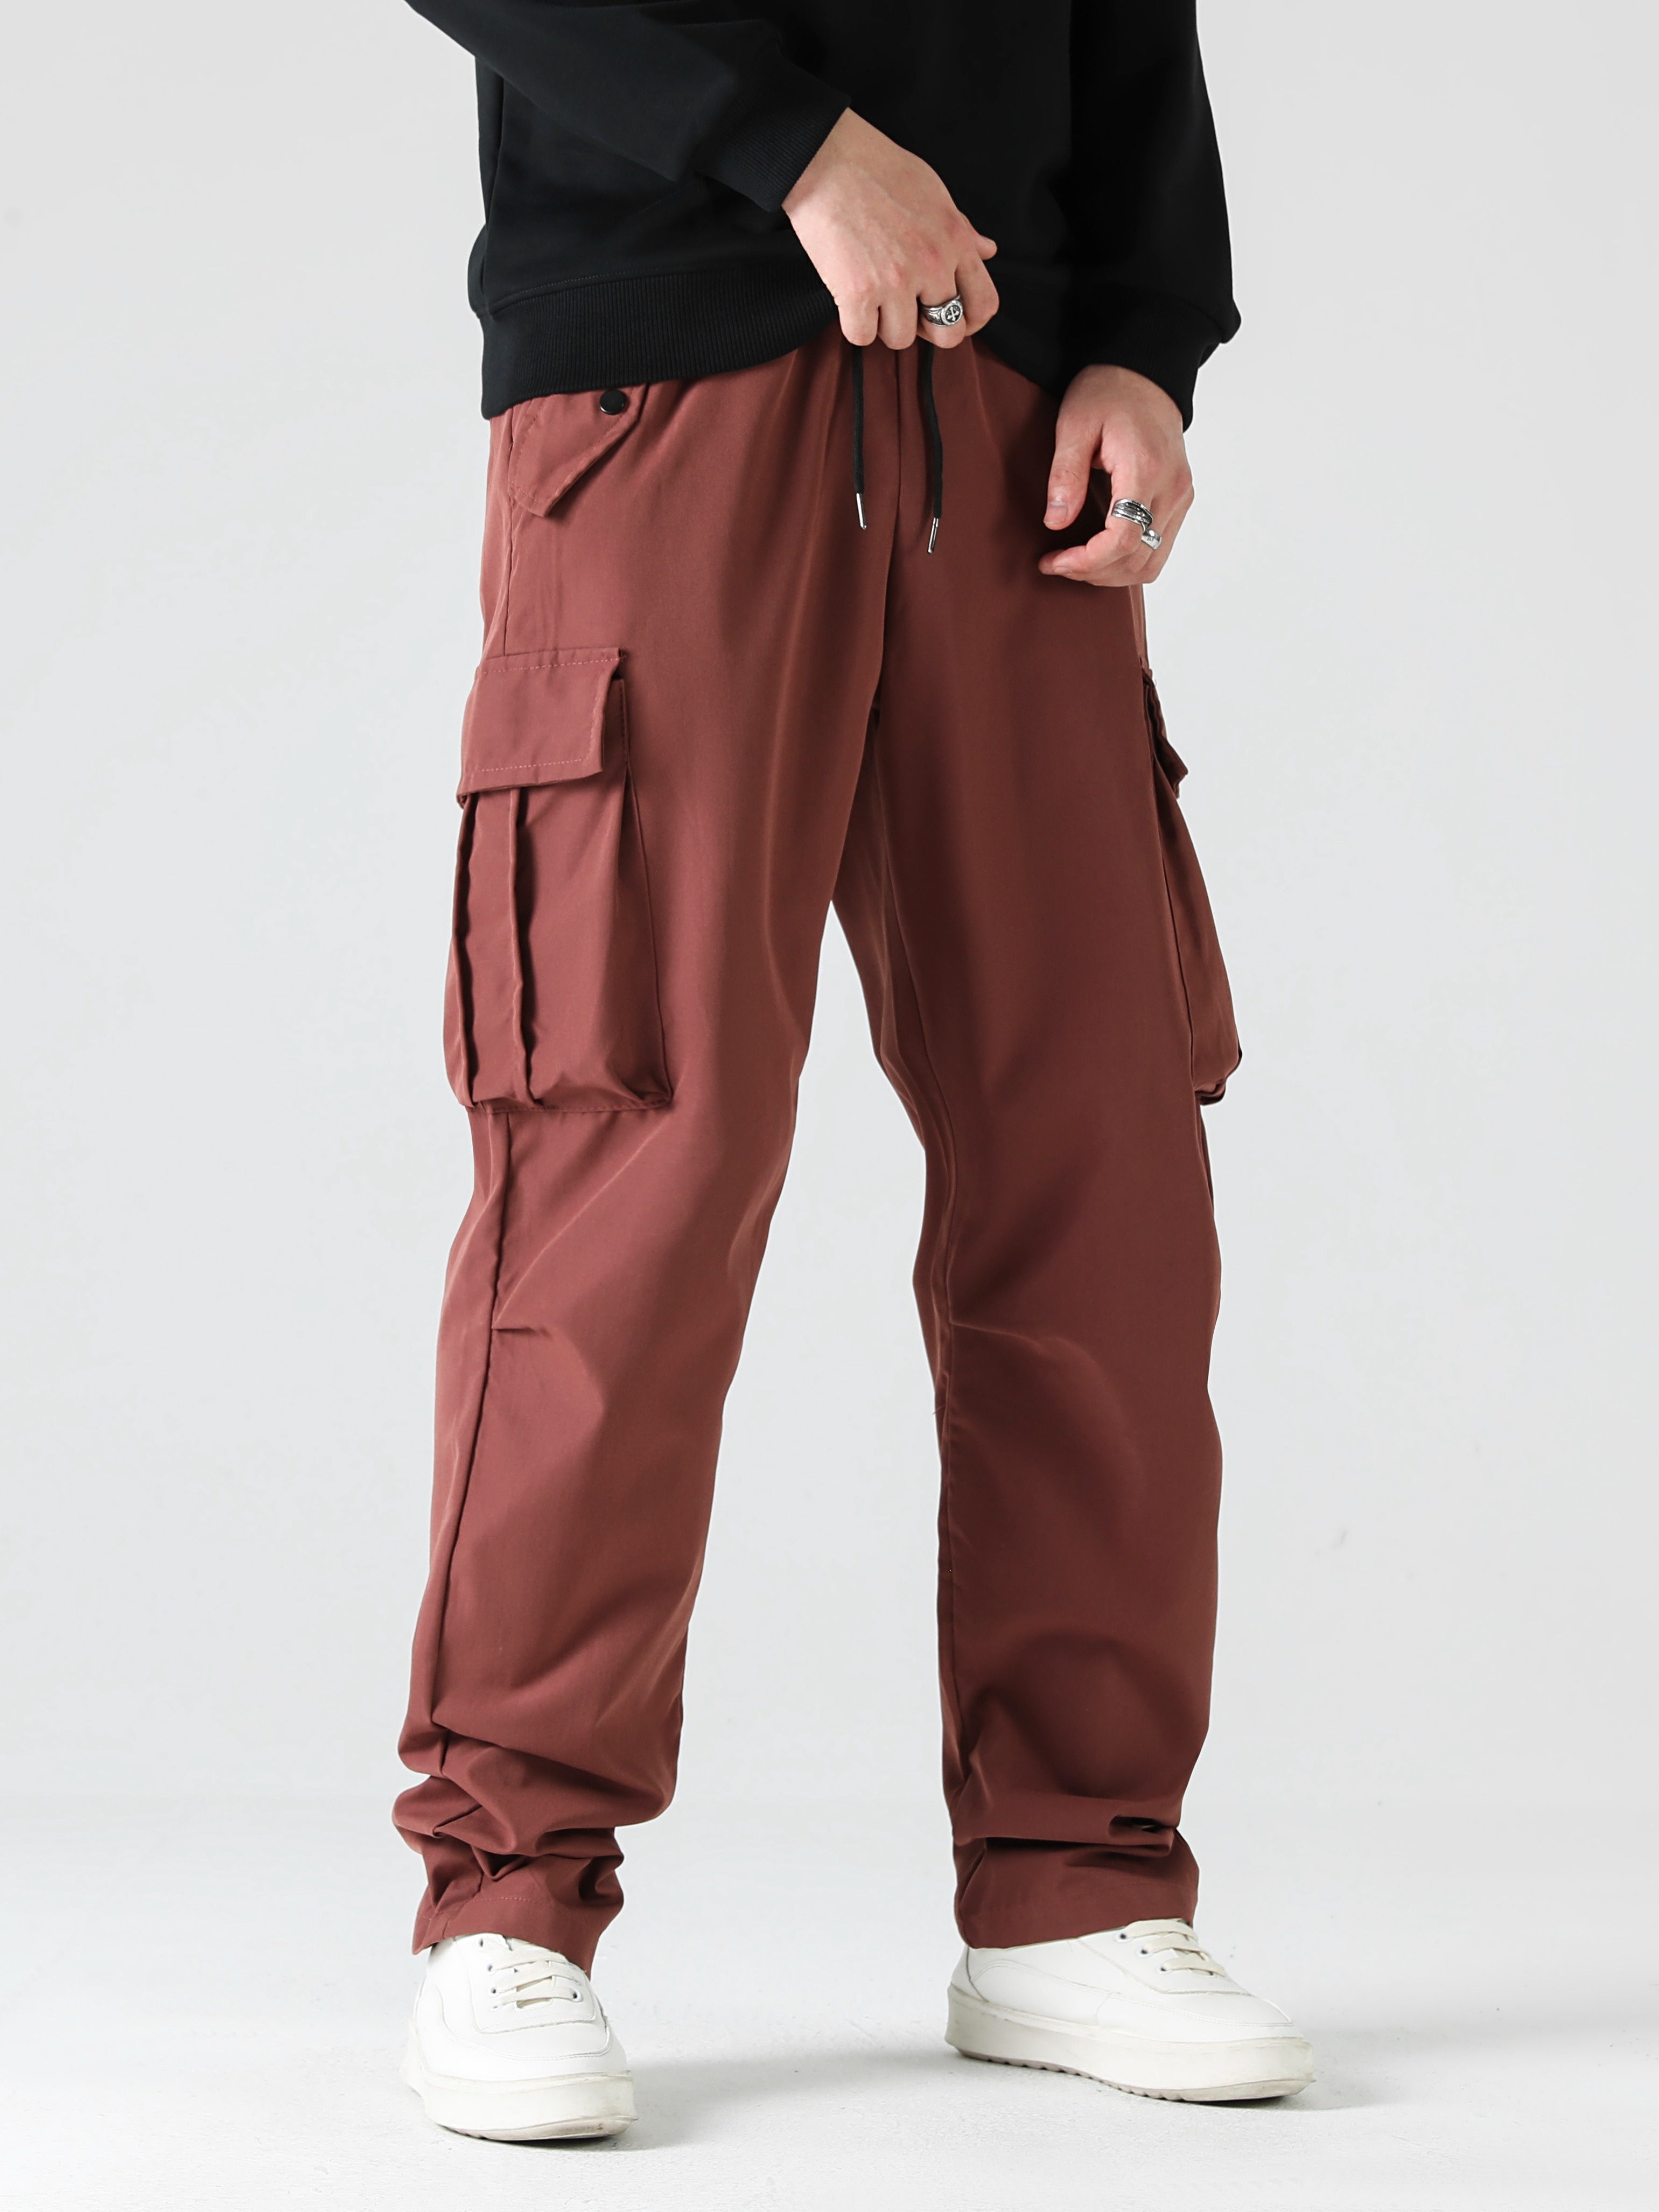 Men's Solid Cargo Pants with Multiple Pockets | Outdoor Fitness Trousers